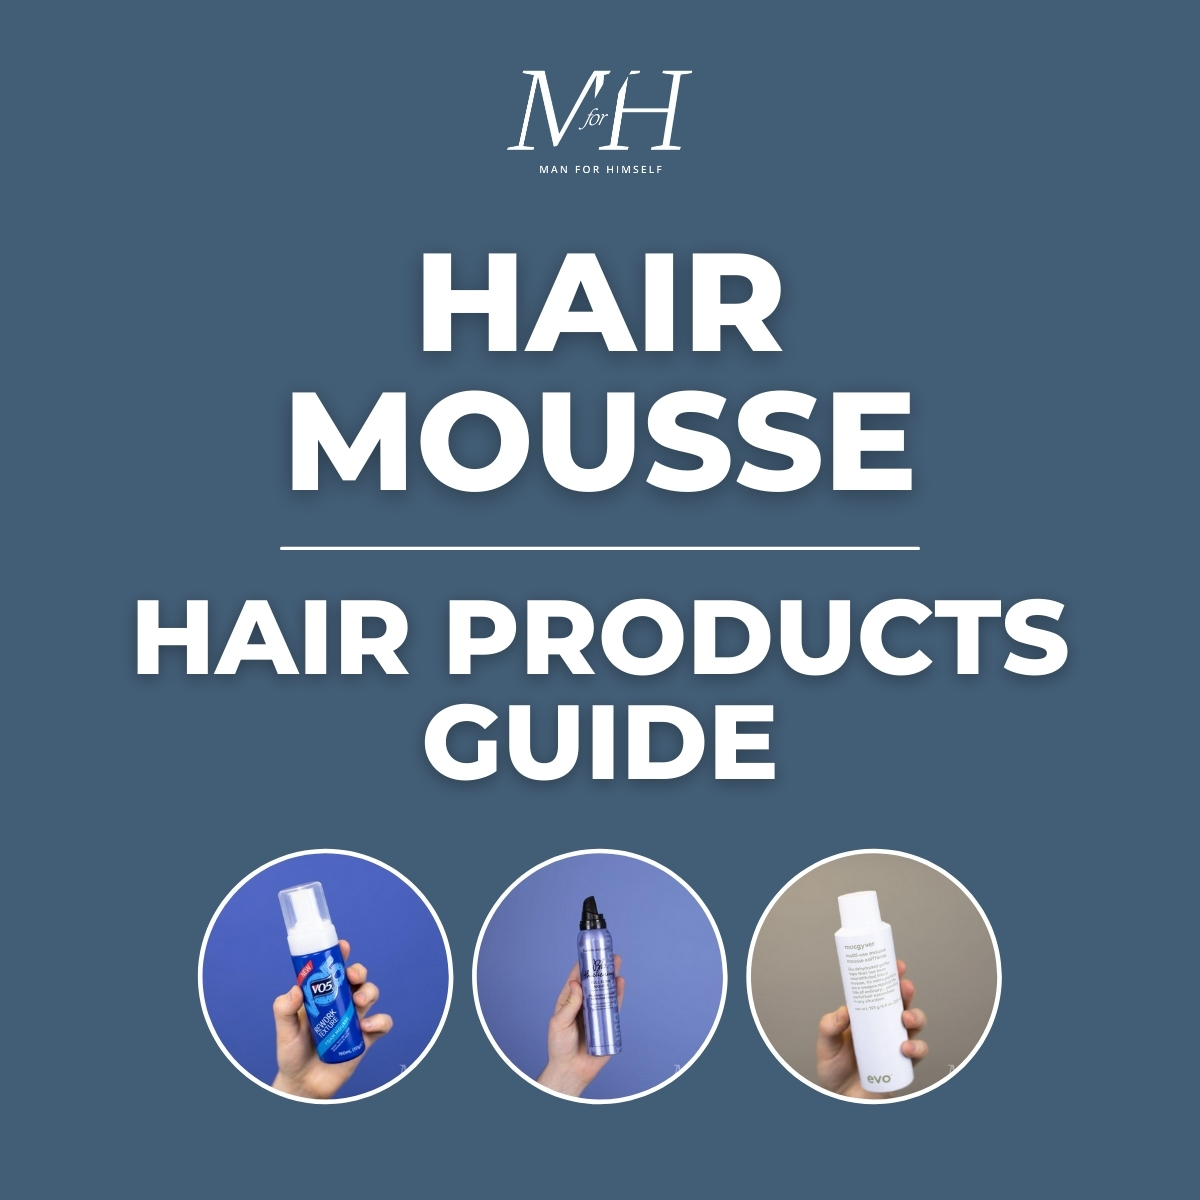 How To Use Hair Mousse | Hair Products Guide | Man For Himself